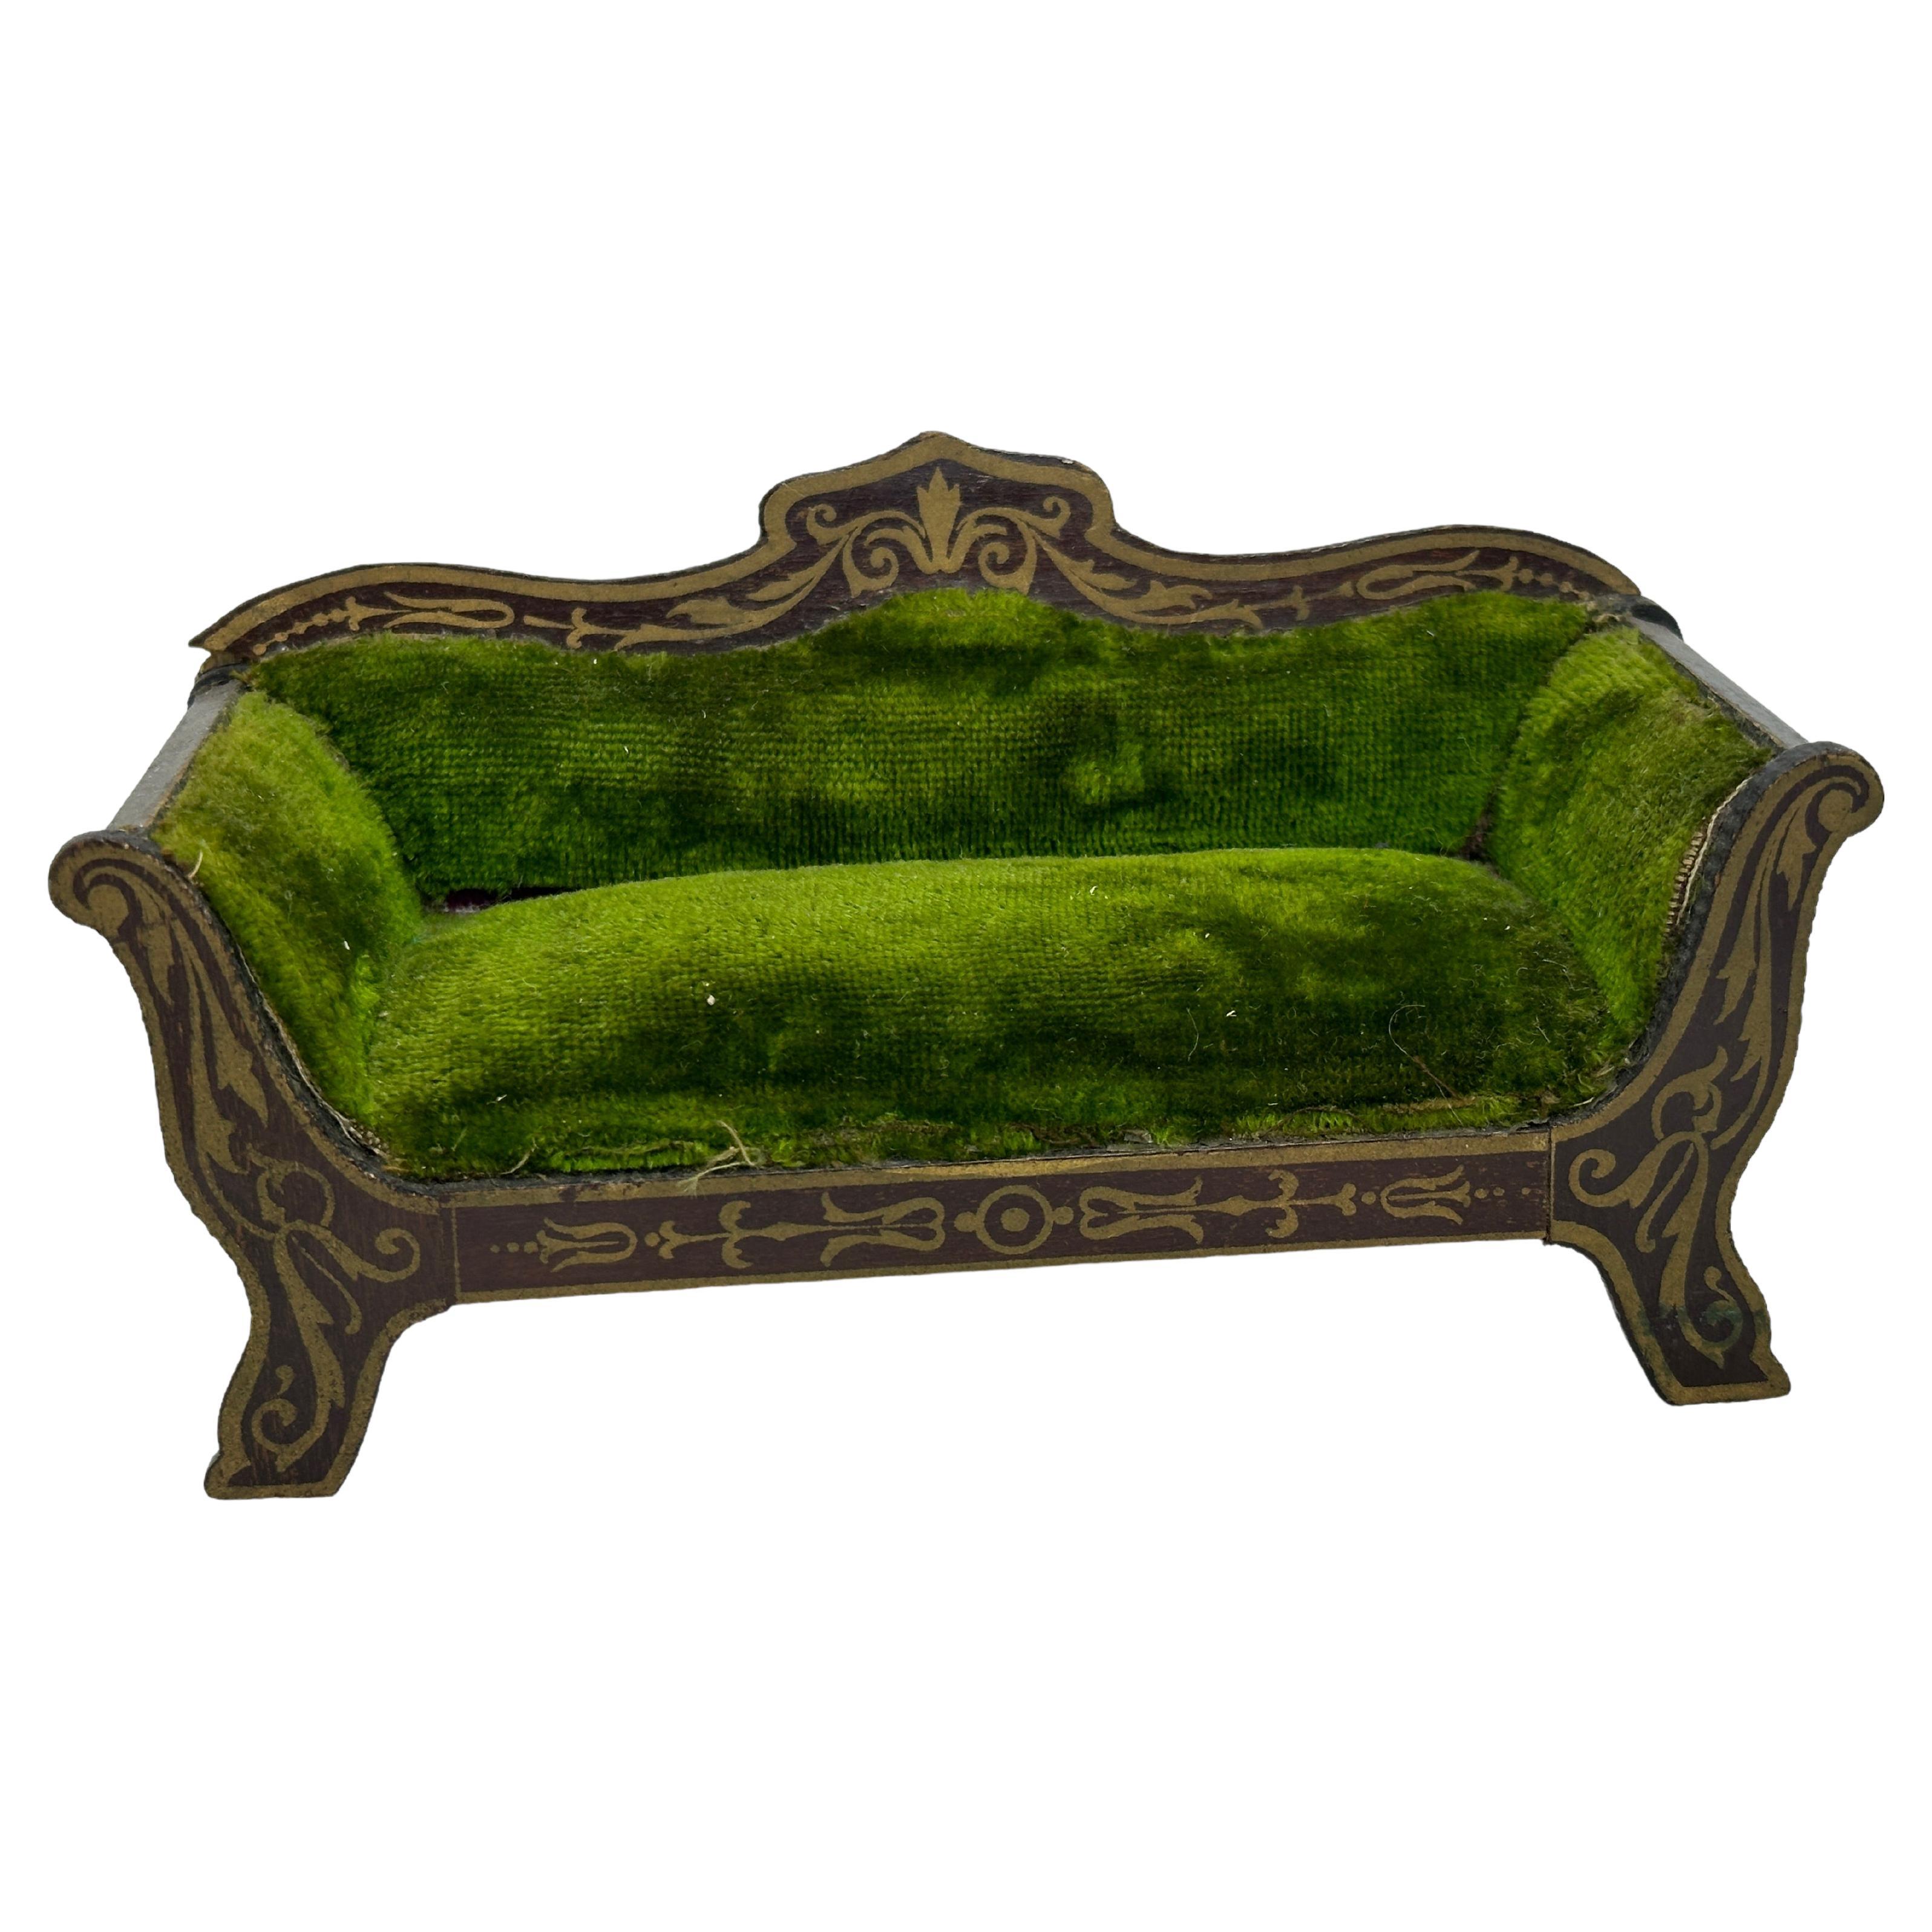 This rare and exquisite miniature antique German wooden Boulle sofa with original velvet upholstery and fine golden transfers, dated about 1890. Made by one the famous German toy companies. A very lovely sofa for antique dolls and for dollhouses.